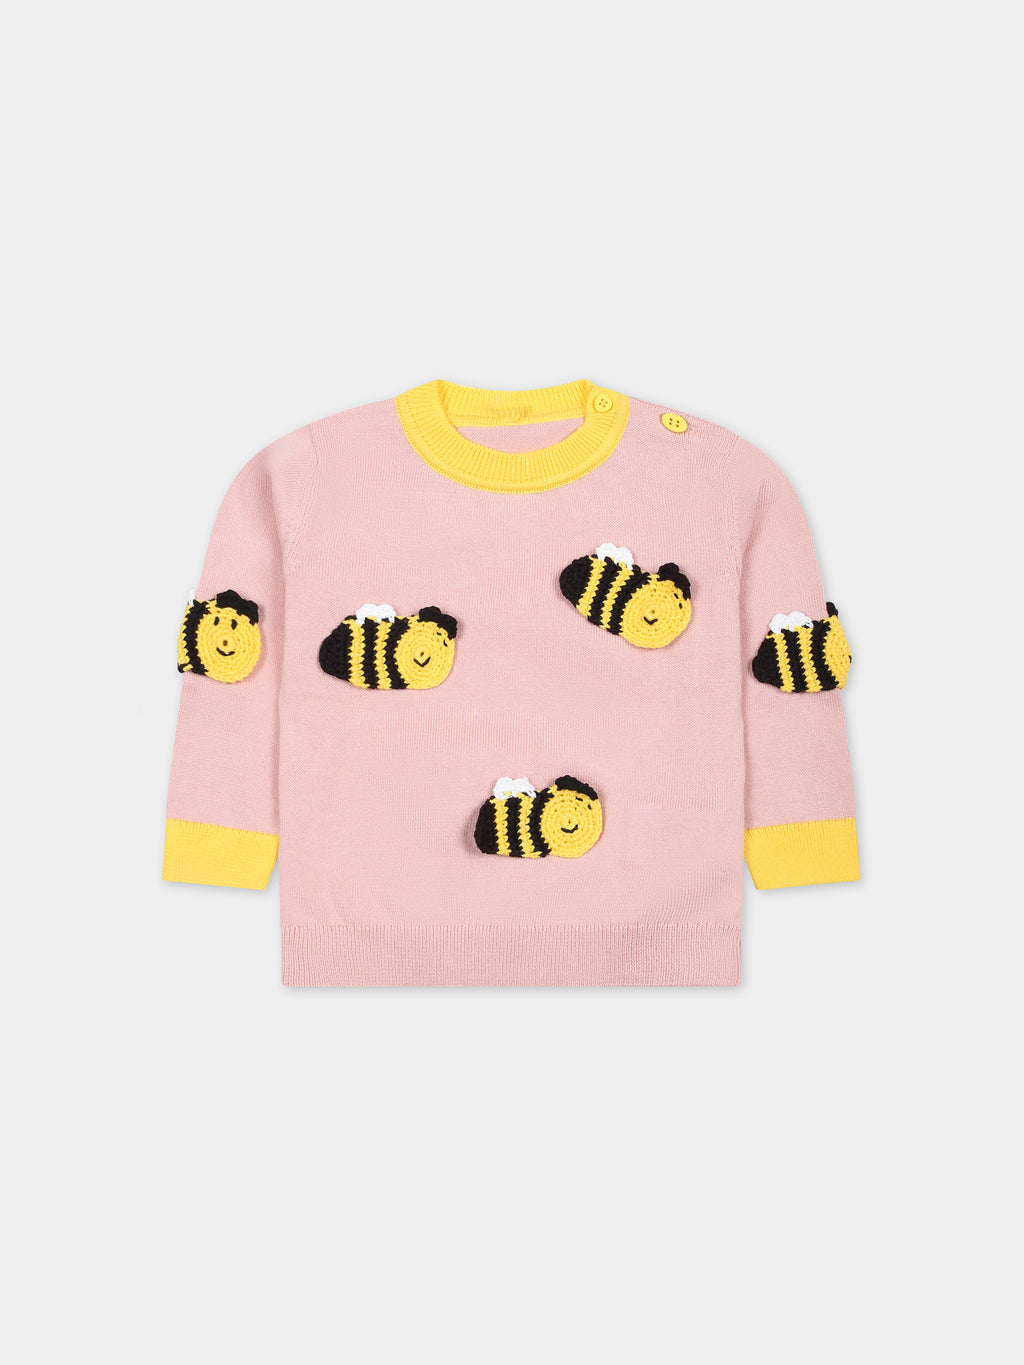 Pink sweater for baby girl with bees